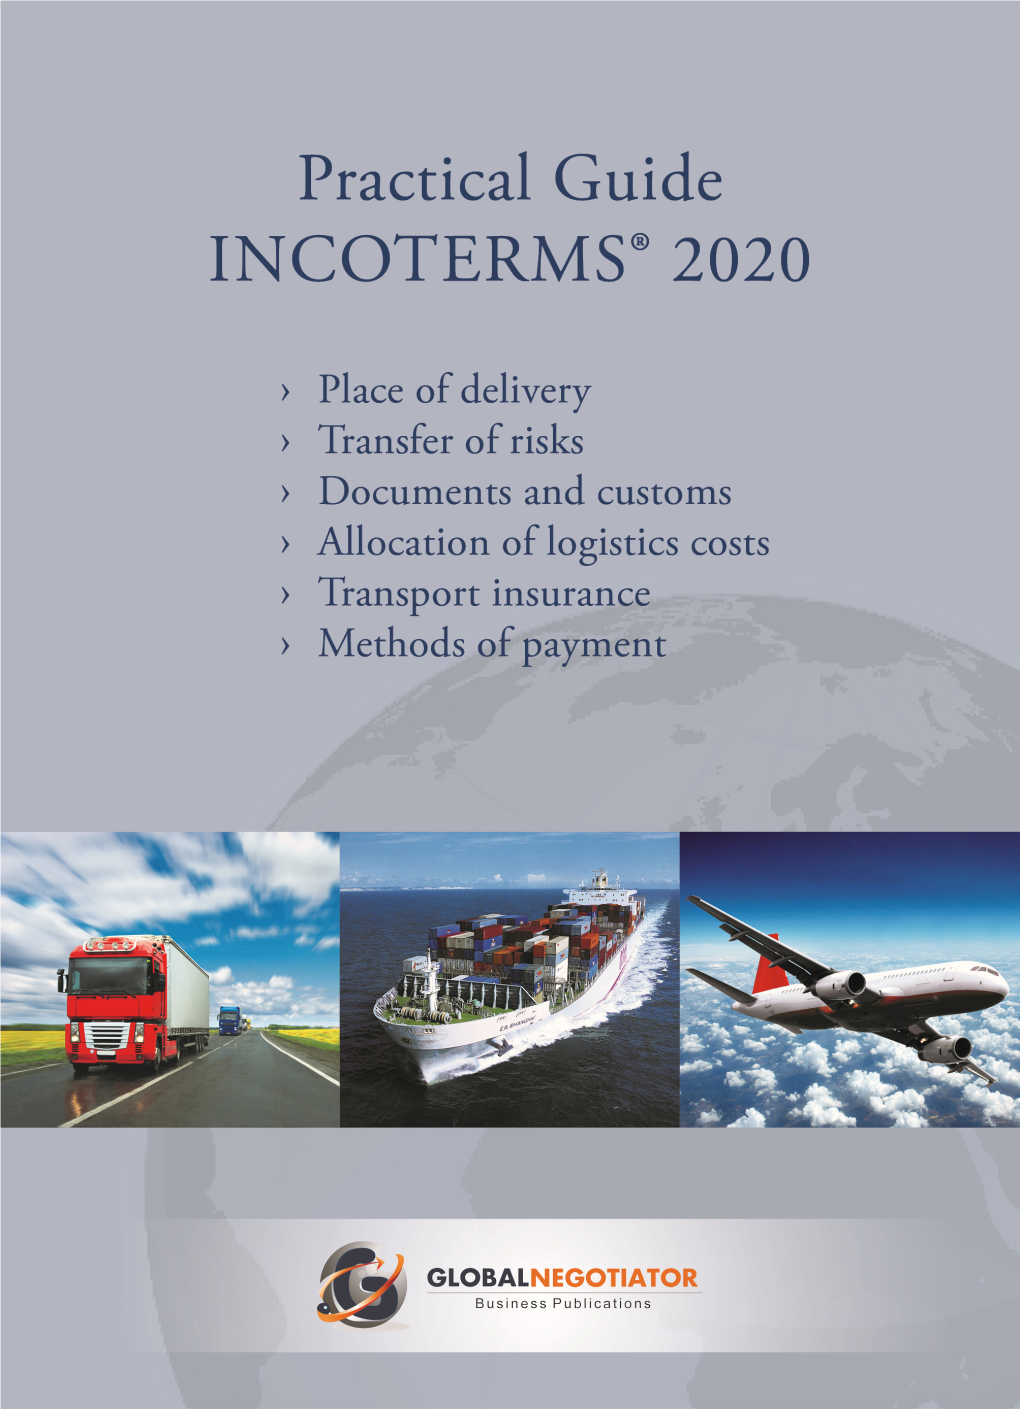 Practical Guide to Incoterms 2020